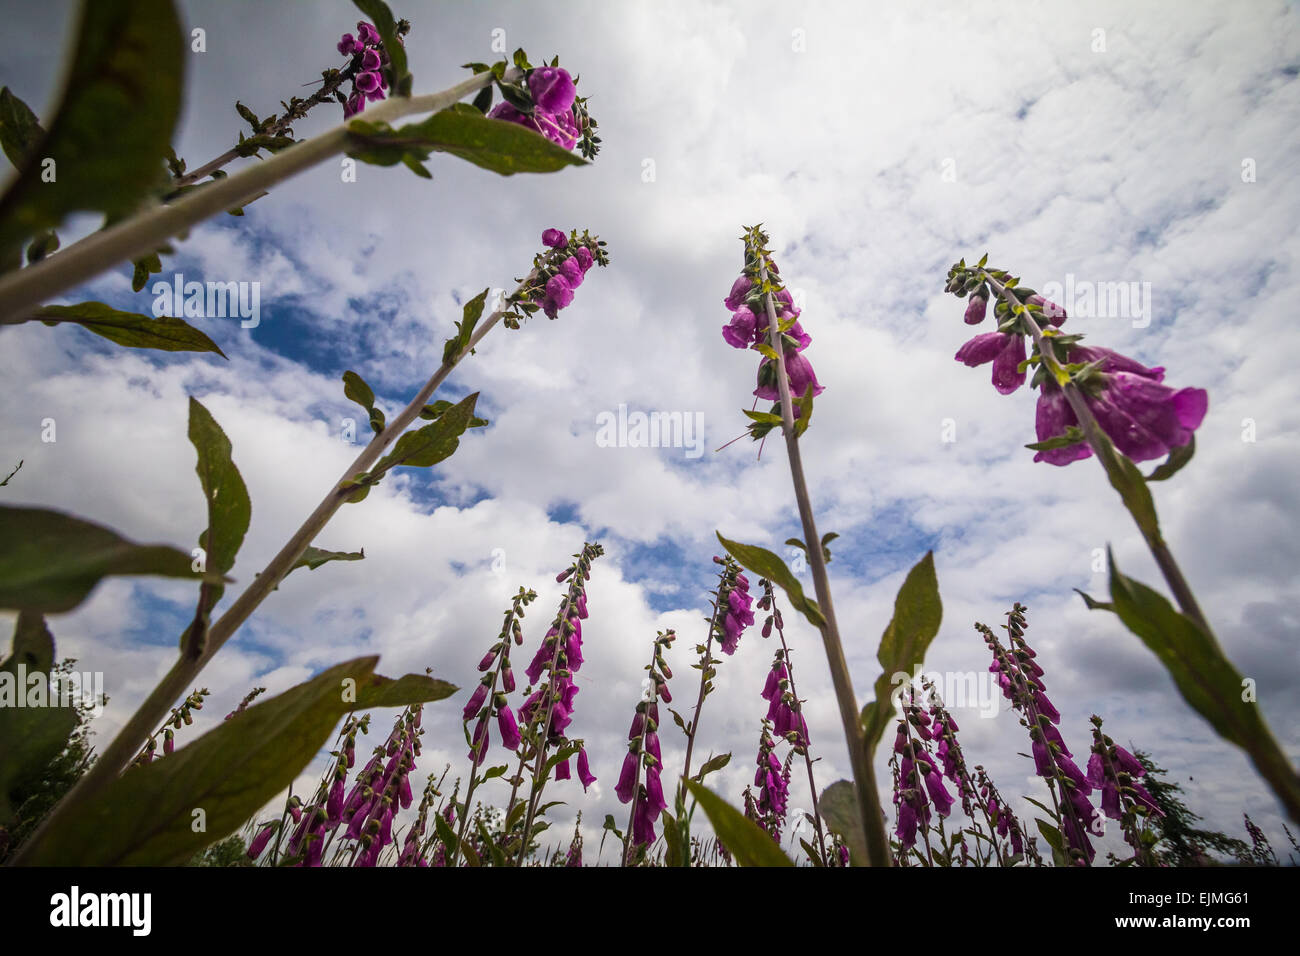 Relaxing and looking up in the air in a field of foxglove flowers. The sky is clouded and little bits of blue are visible. Stock Photo